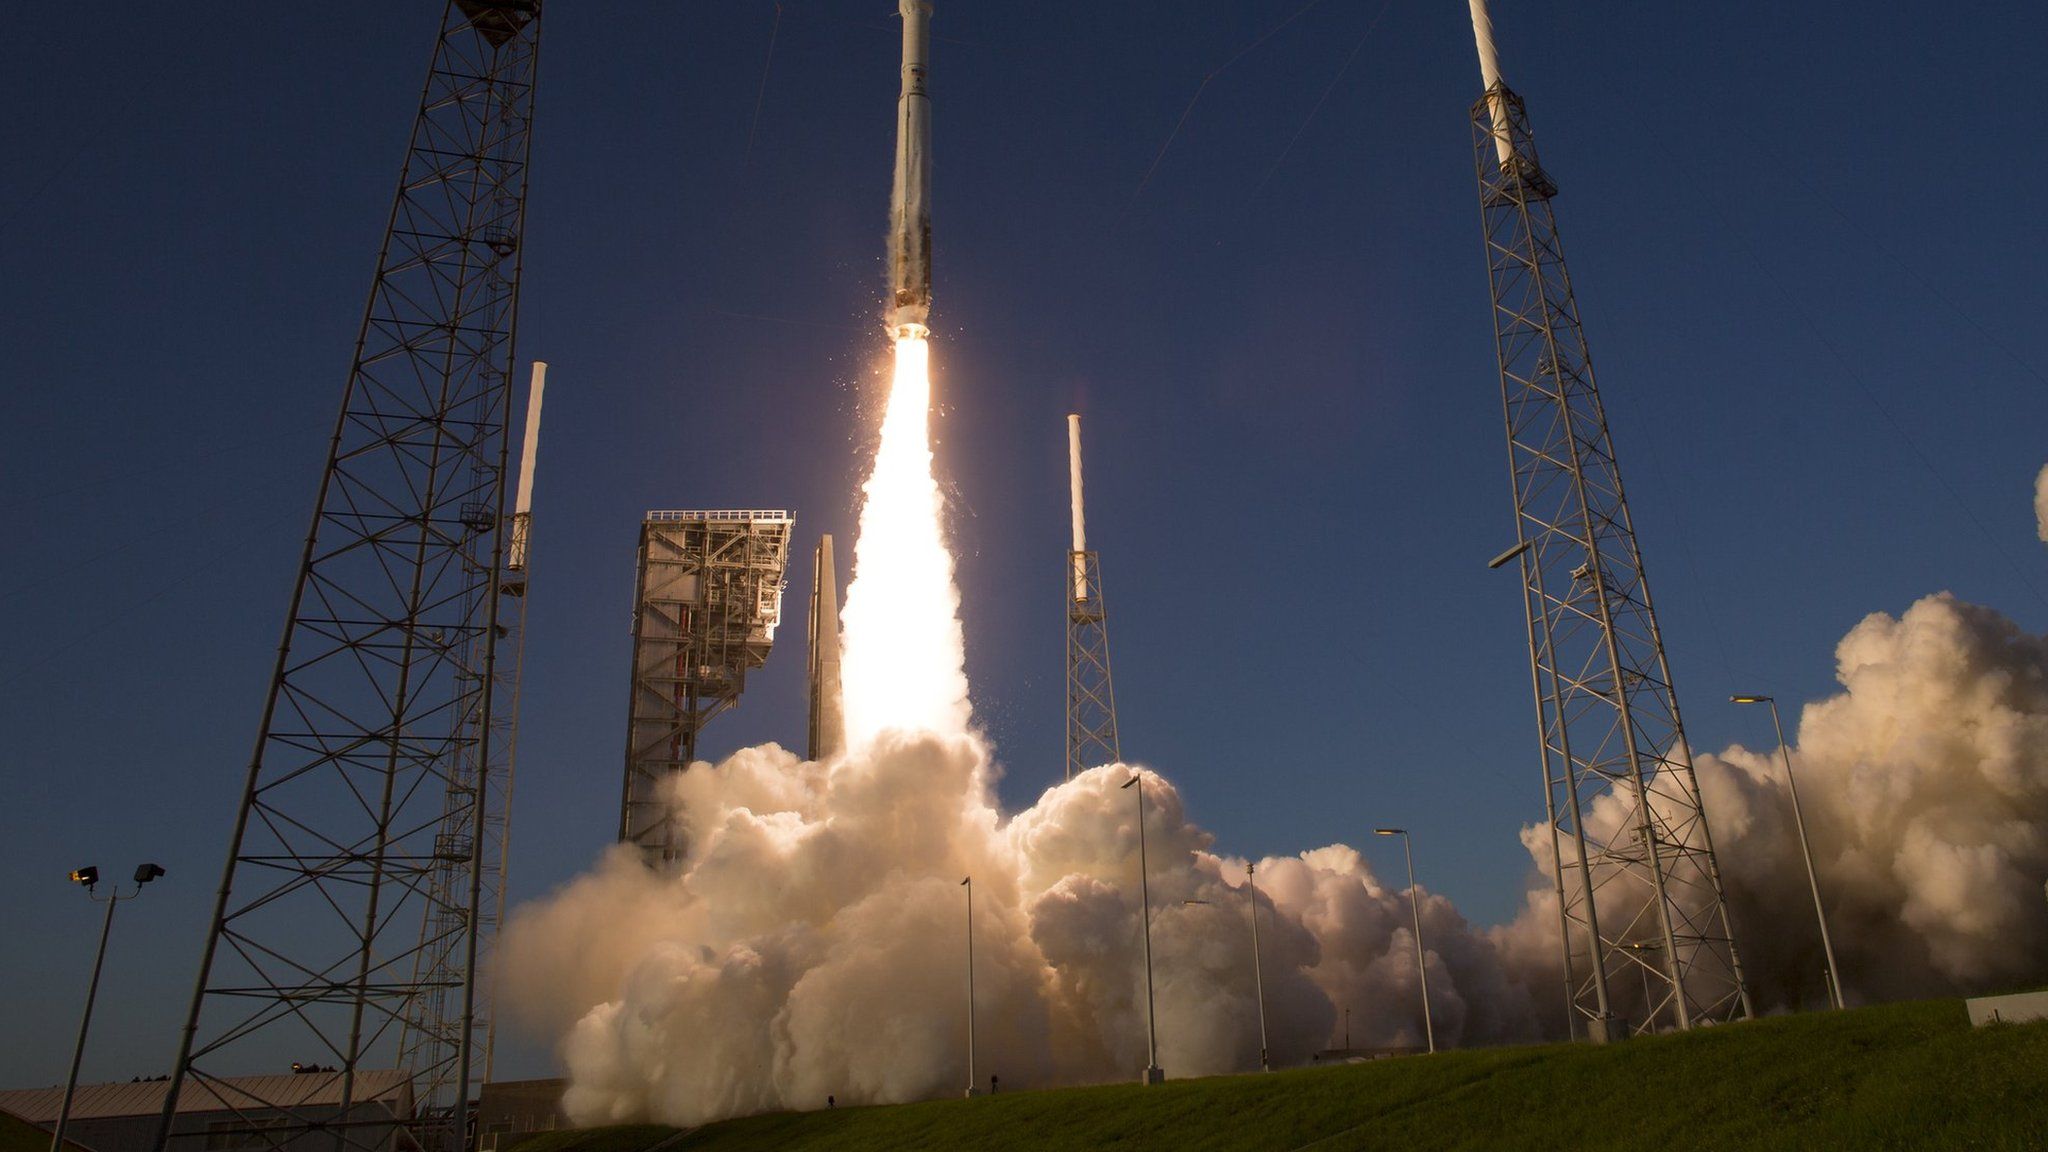 Image shows an Atlas V rocket, which have been used to launch US military satellites